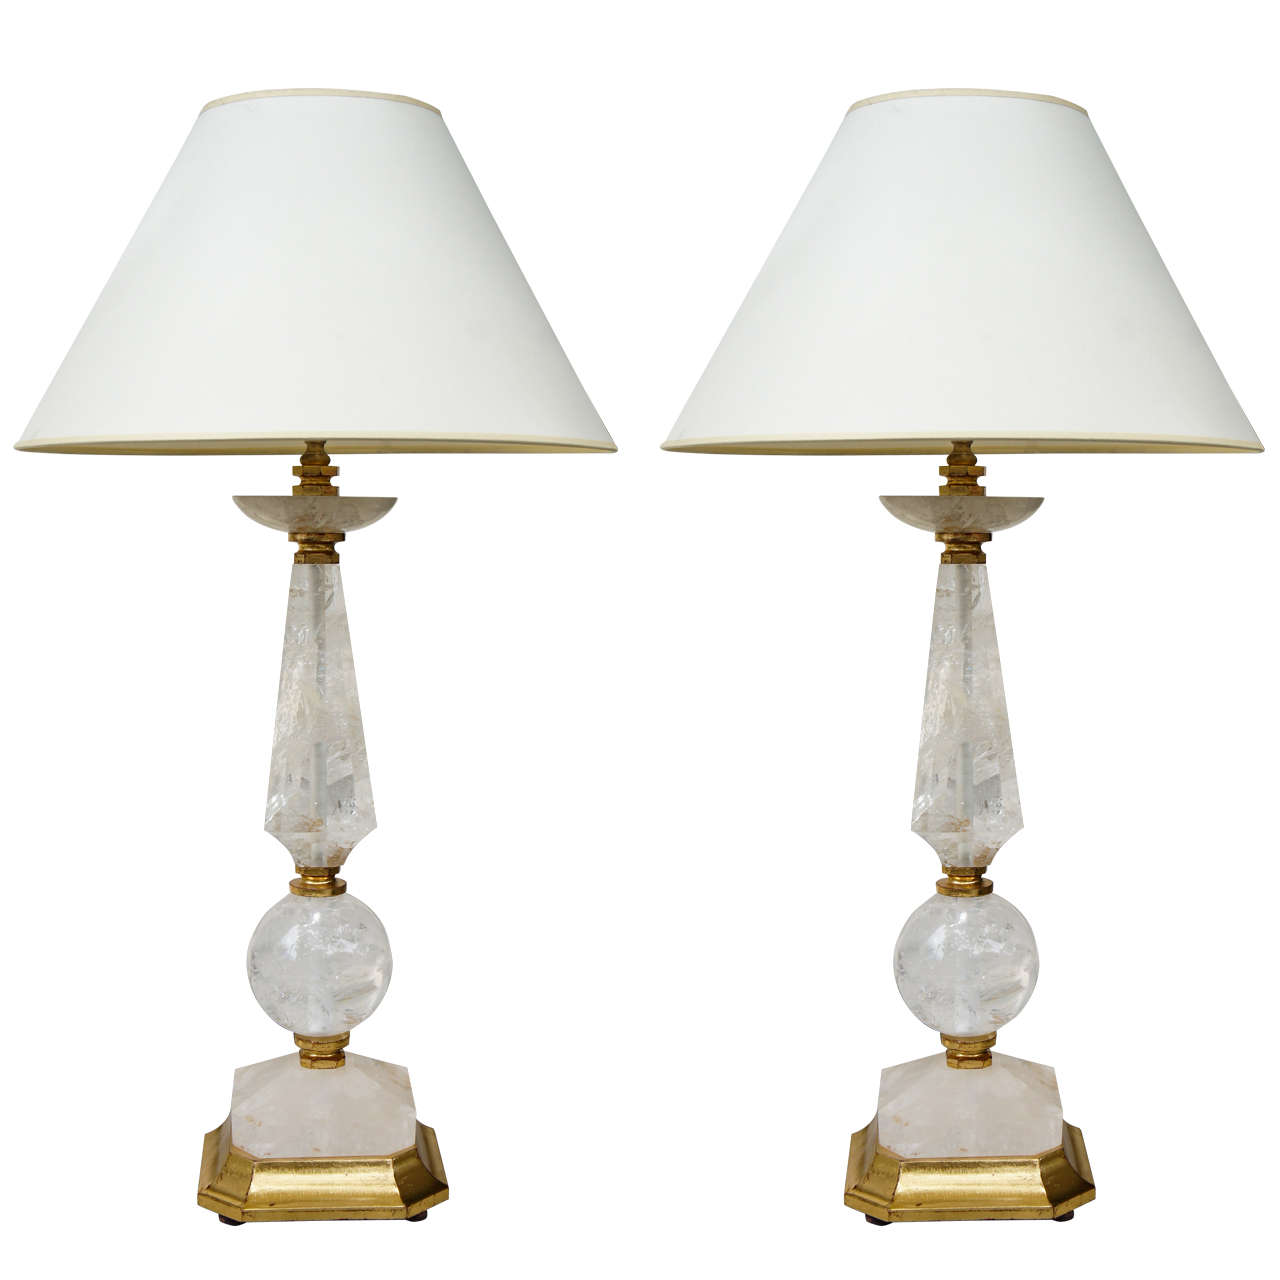 A Stunning Pair of Deco inspired Rock Crystal Lamps